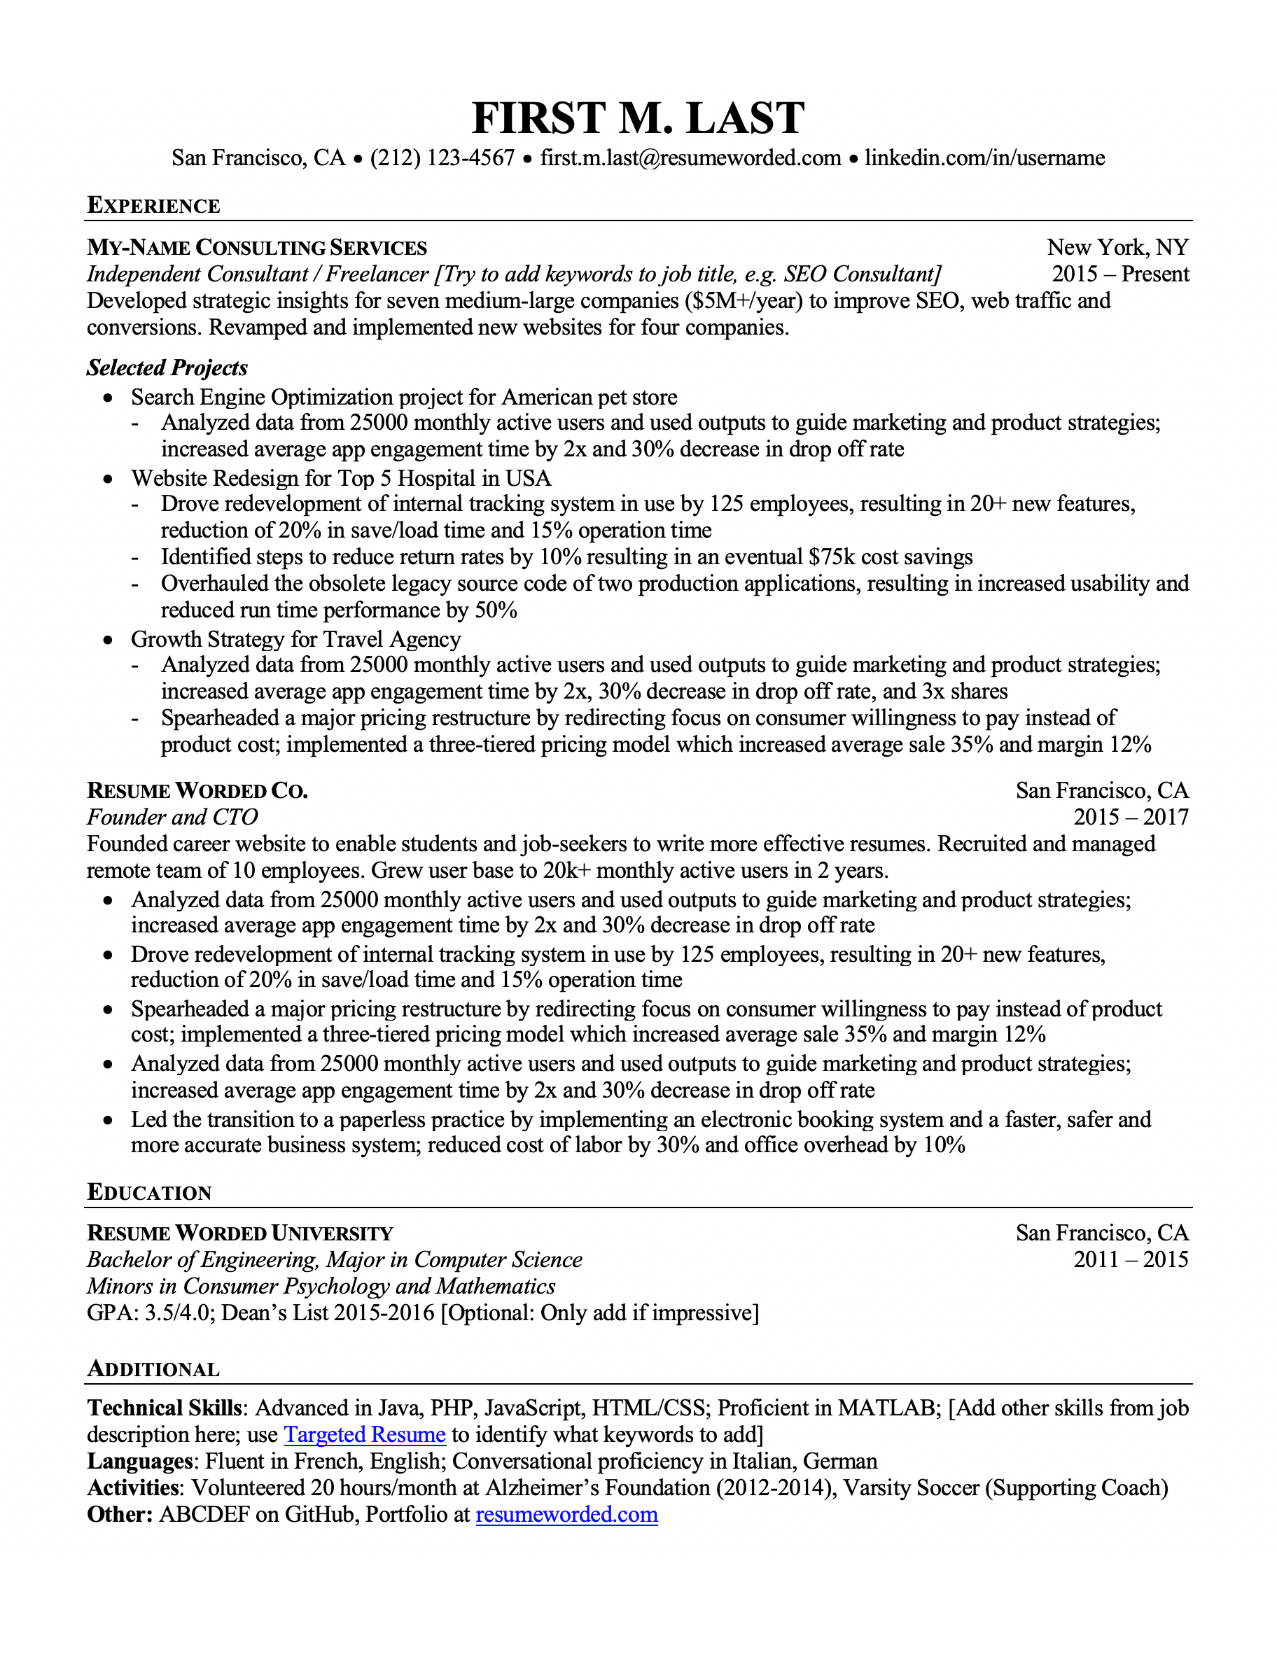 Professional ATS Resume Templates For Experienced Hires And College 